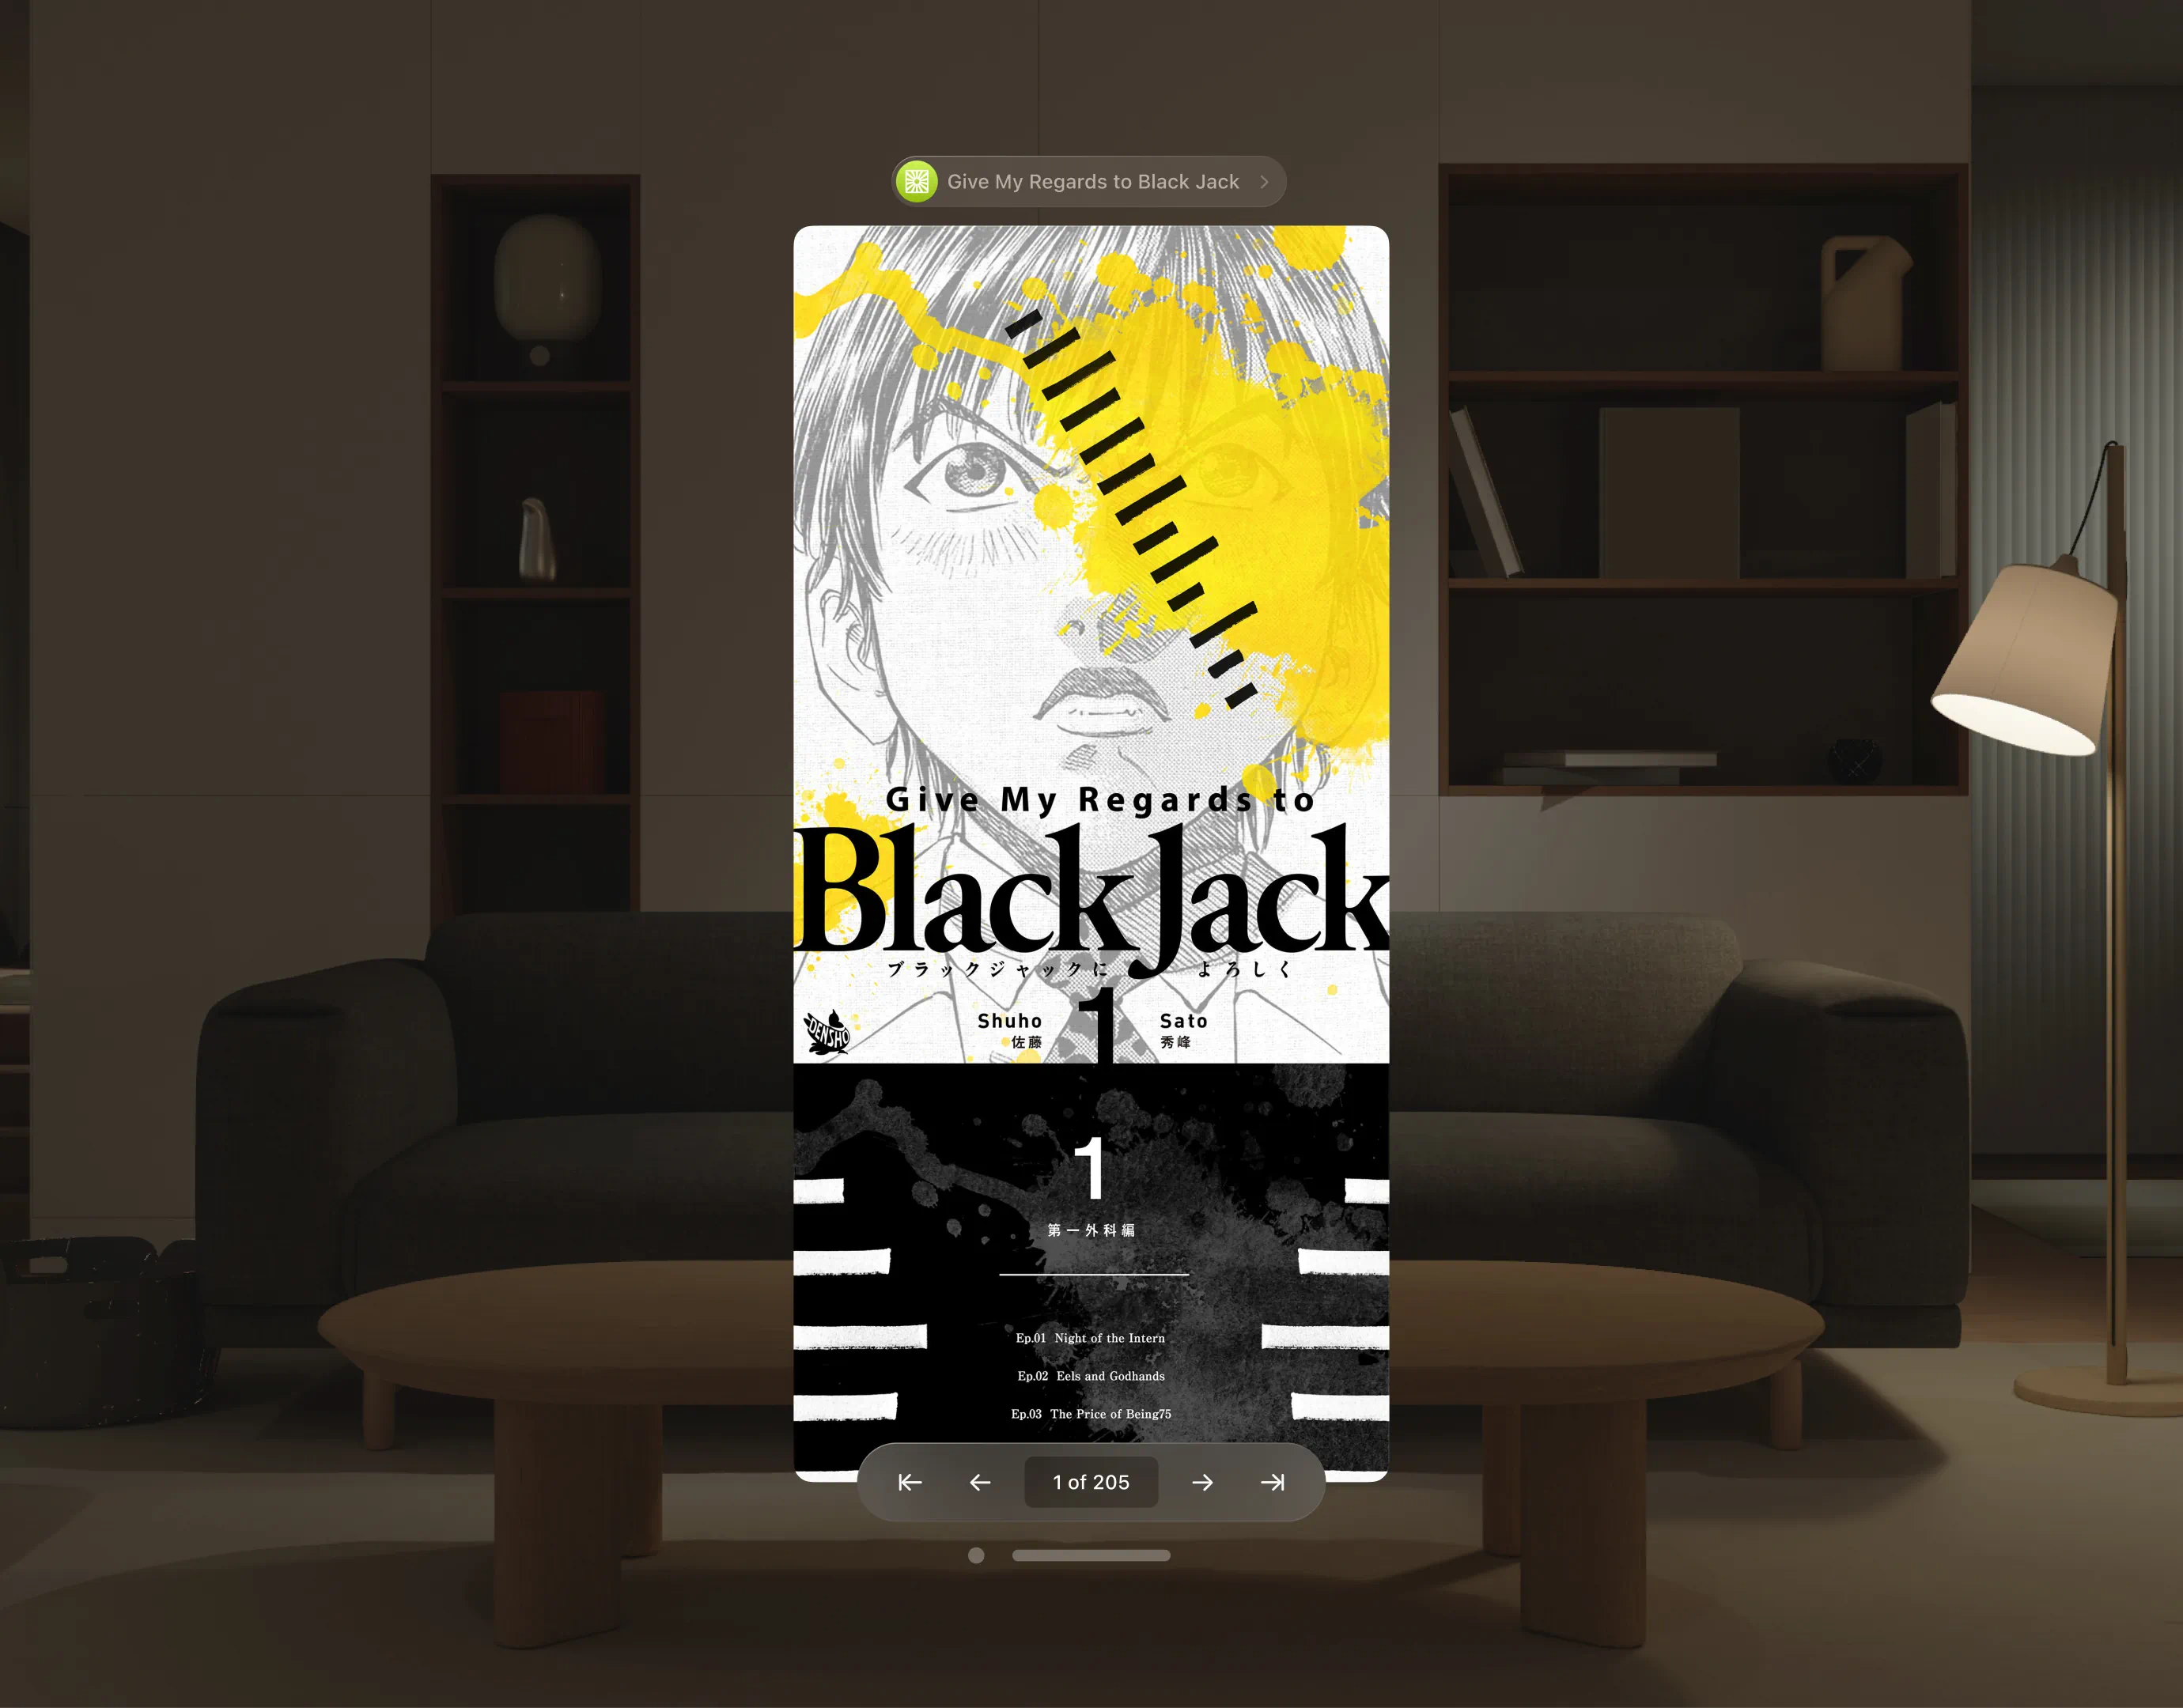 Mockup of the 'Tezuka Reader' app on Apple Vision Pro, featuring a 'vertical strip' display option for a manga. The display is set against a modern living room with a dark gray sofa, round wooden coffee table, and a stylish floor lamp.